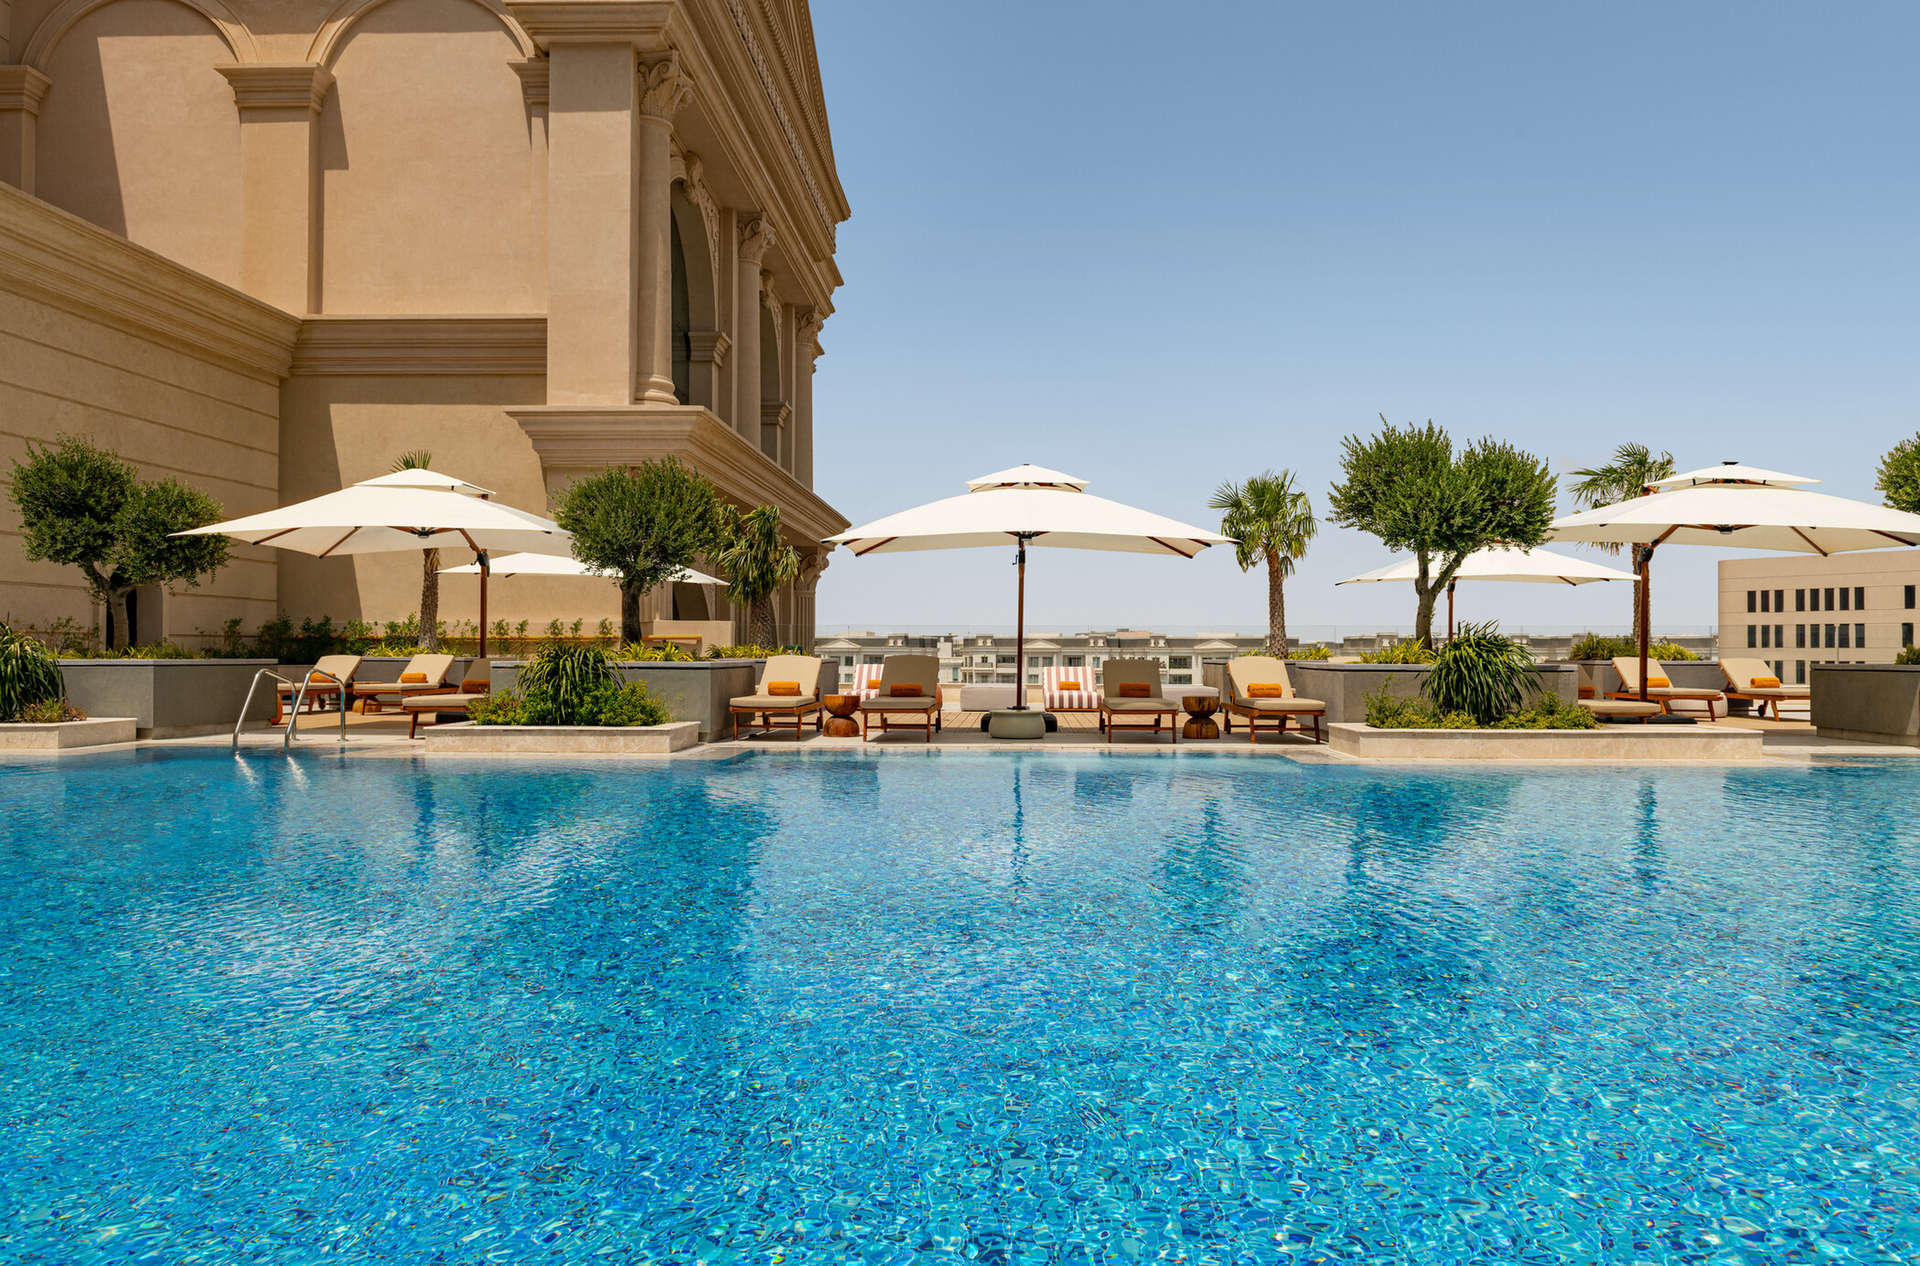 the palm-shaded outdoor pool at Le Royal Méridien Doha